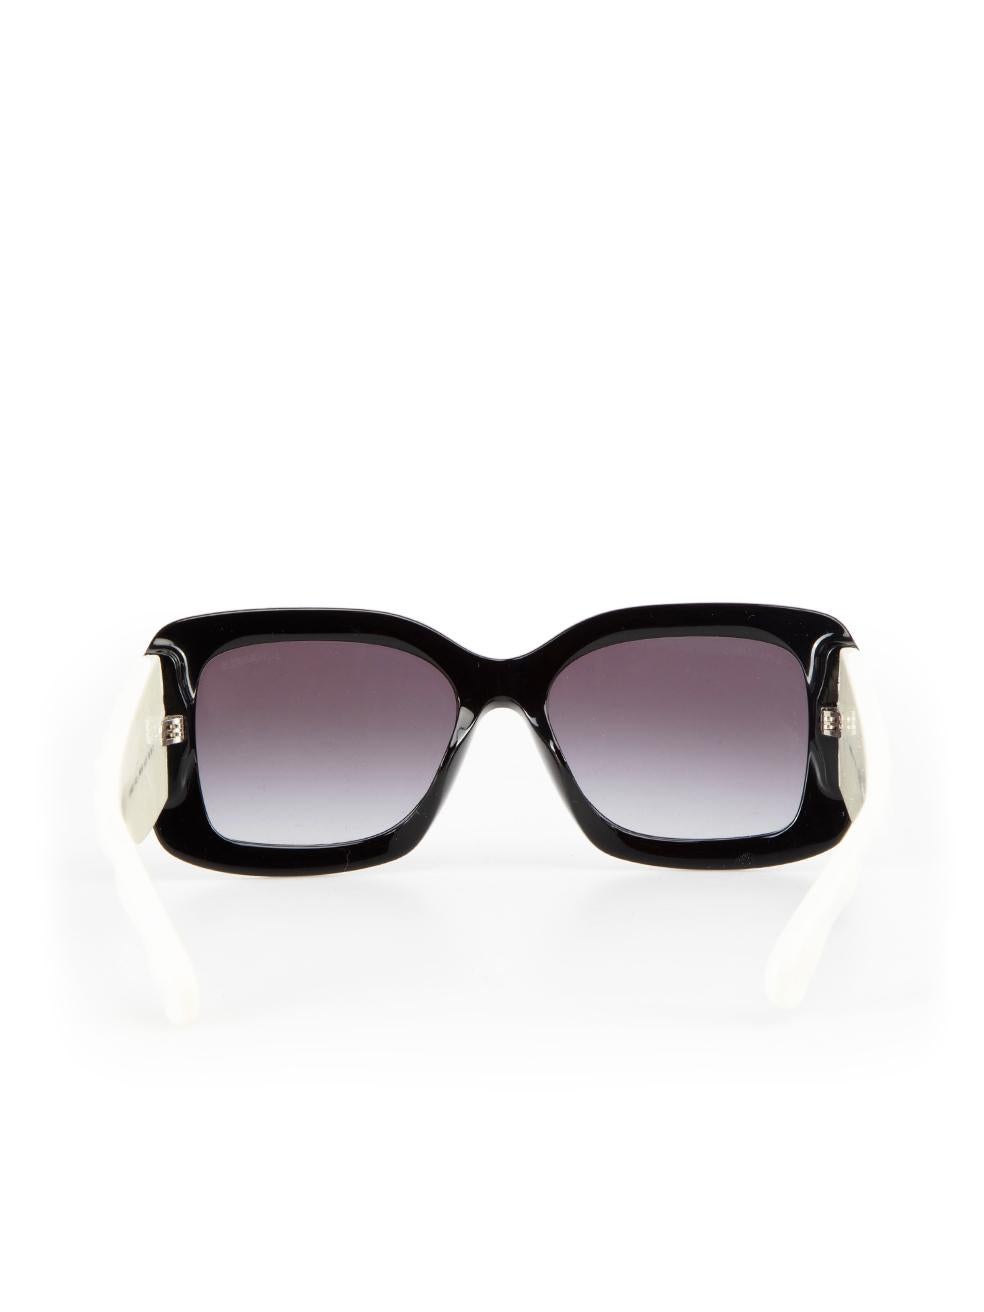 Women's Chanel Black & White Quilted Arms Square Sunglasses For Sale